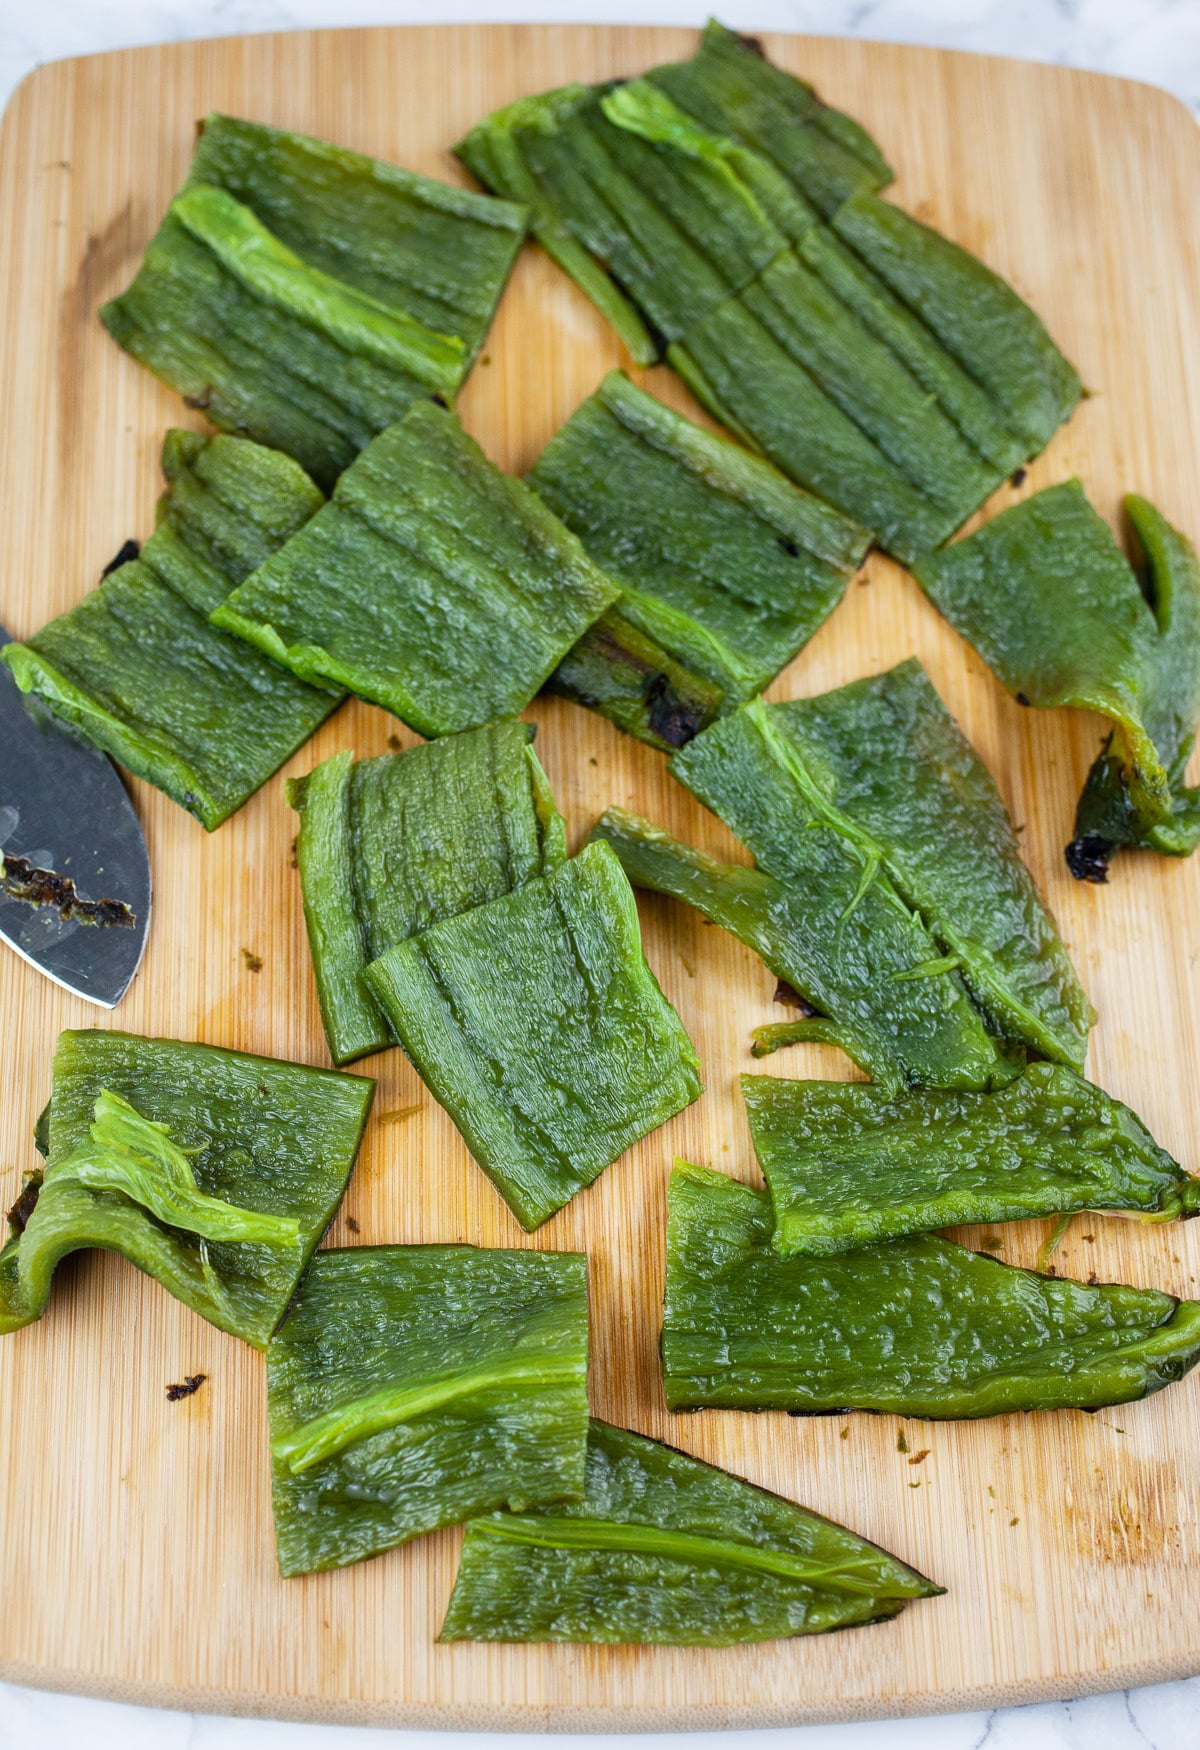 Roasted poblano peppers cut into chunks on wooden cutting board.